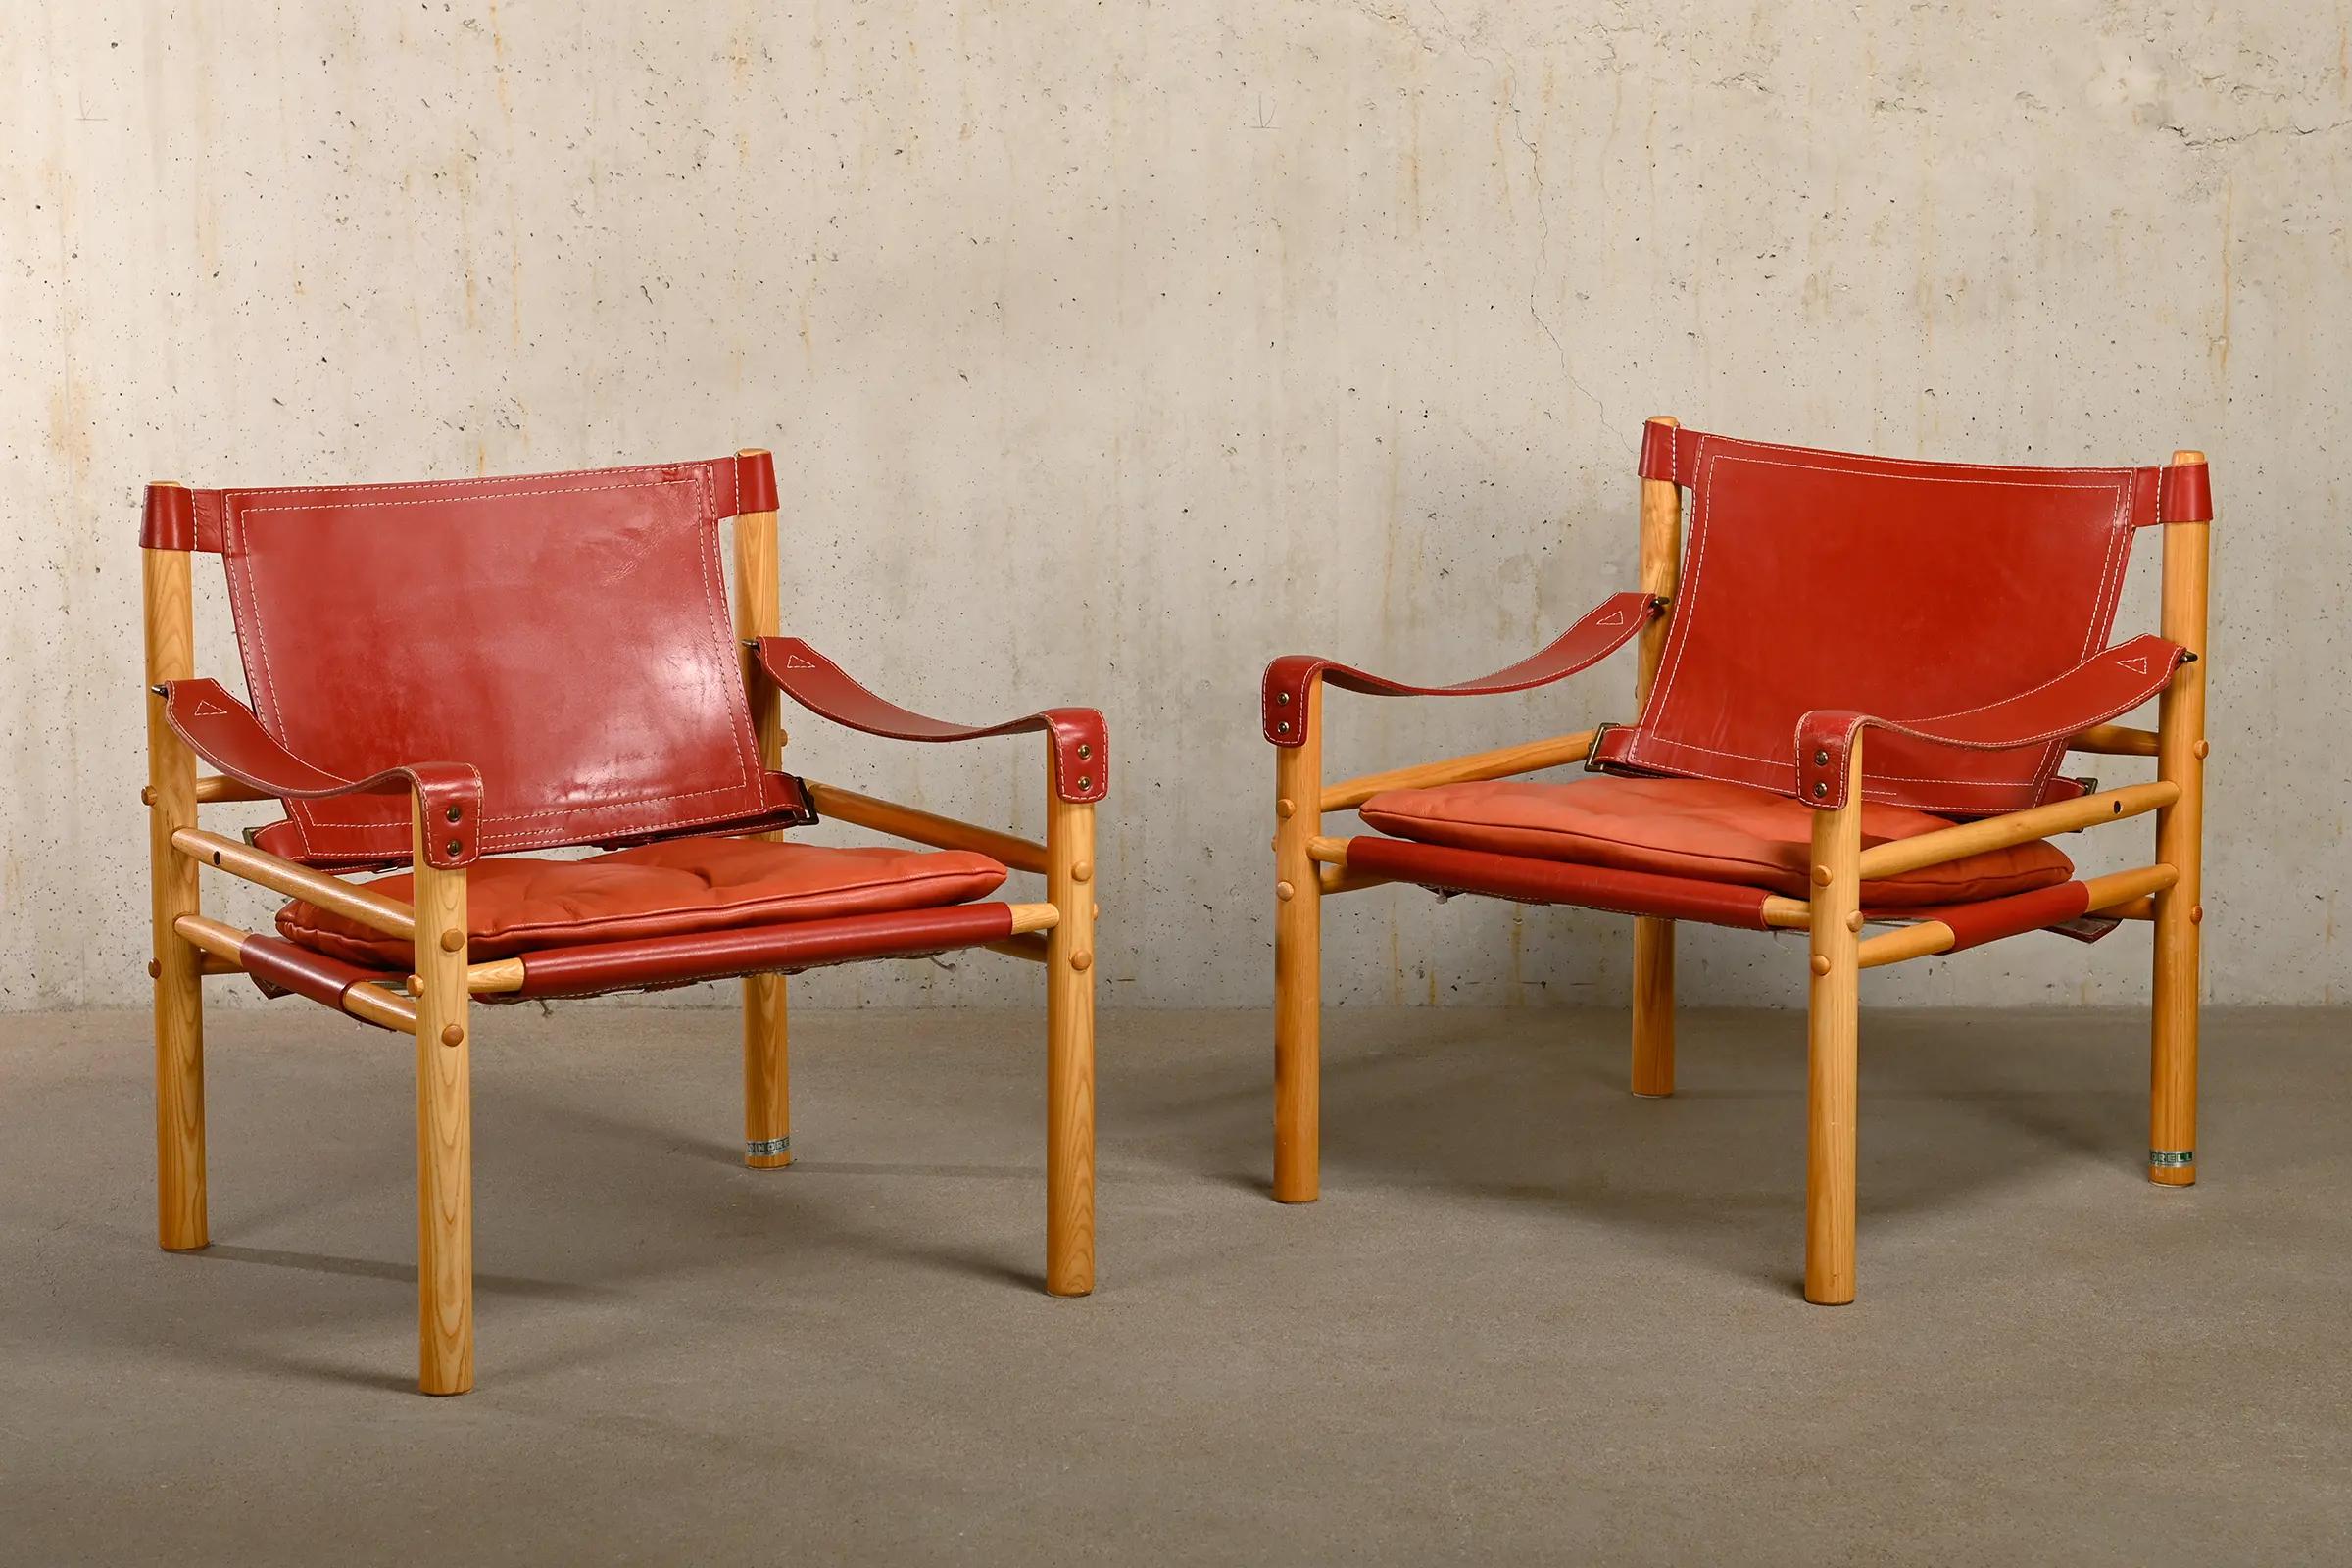 Great pair of Sirocco Safari Lounge Chairs designed by Arne Norell and manufactured by Norell Möbel AB in Sweden. Light patined Ash frames with the original leather cushions in beautiful red leather. All in very good condition. Signed with